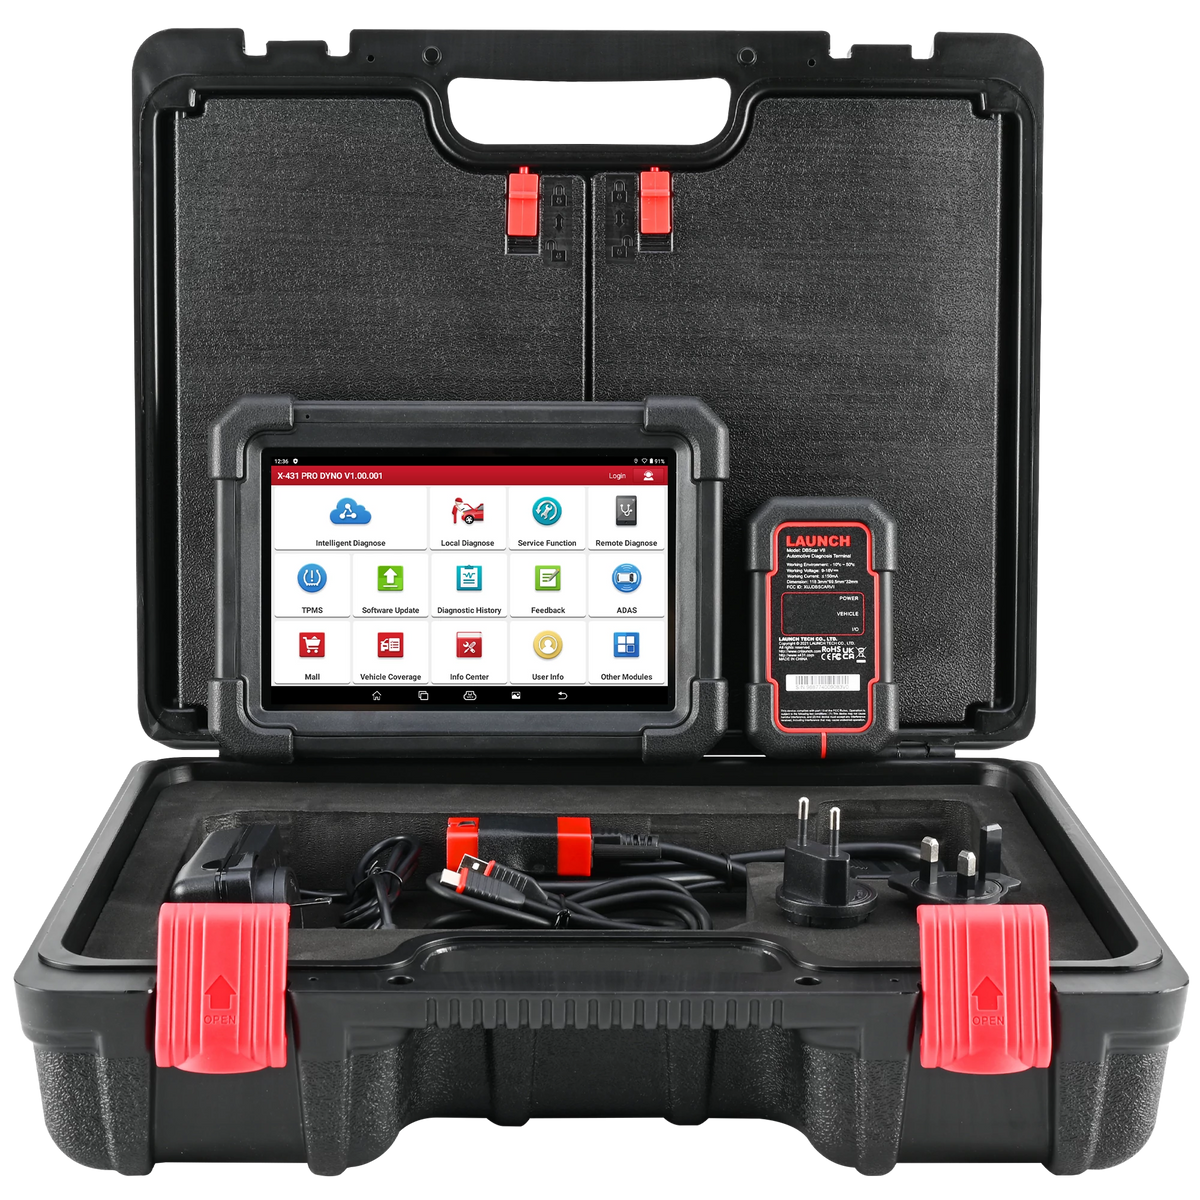 Toptool– Which is better: the Autel maxisys ultra or the Maxicom ultra lite?